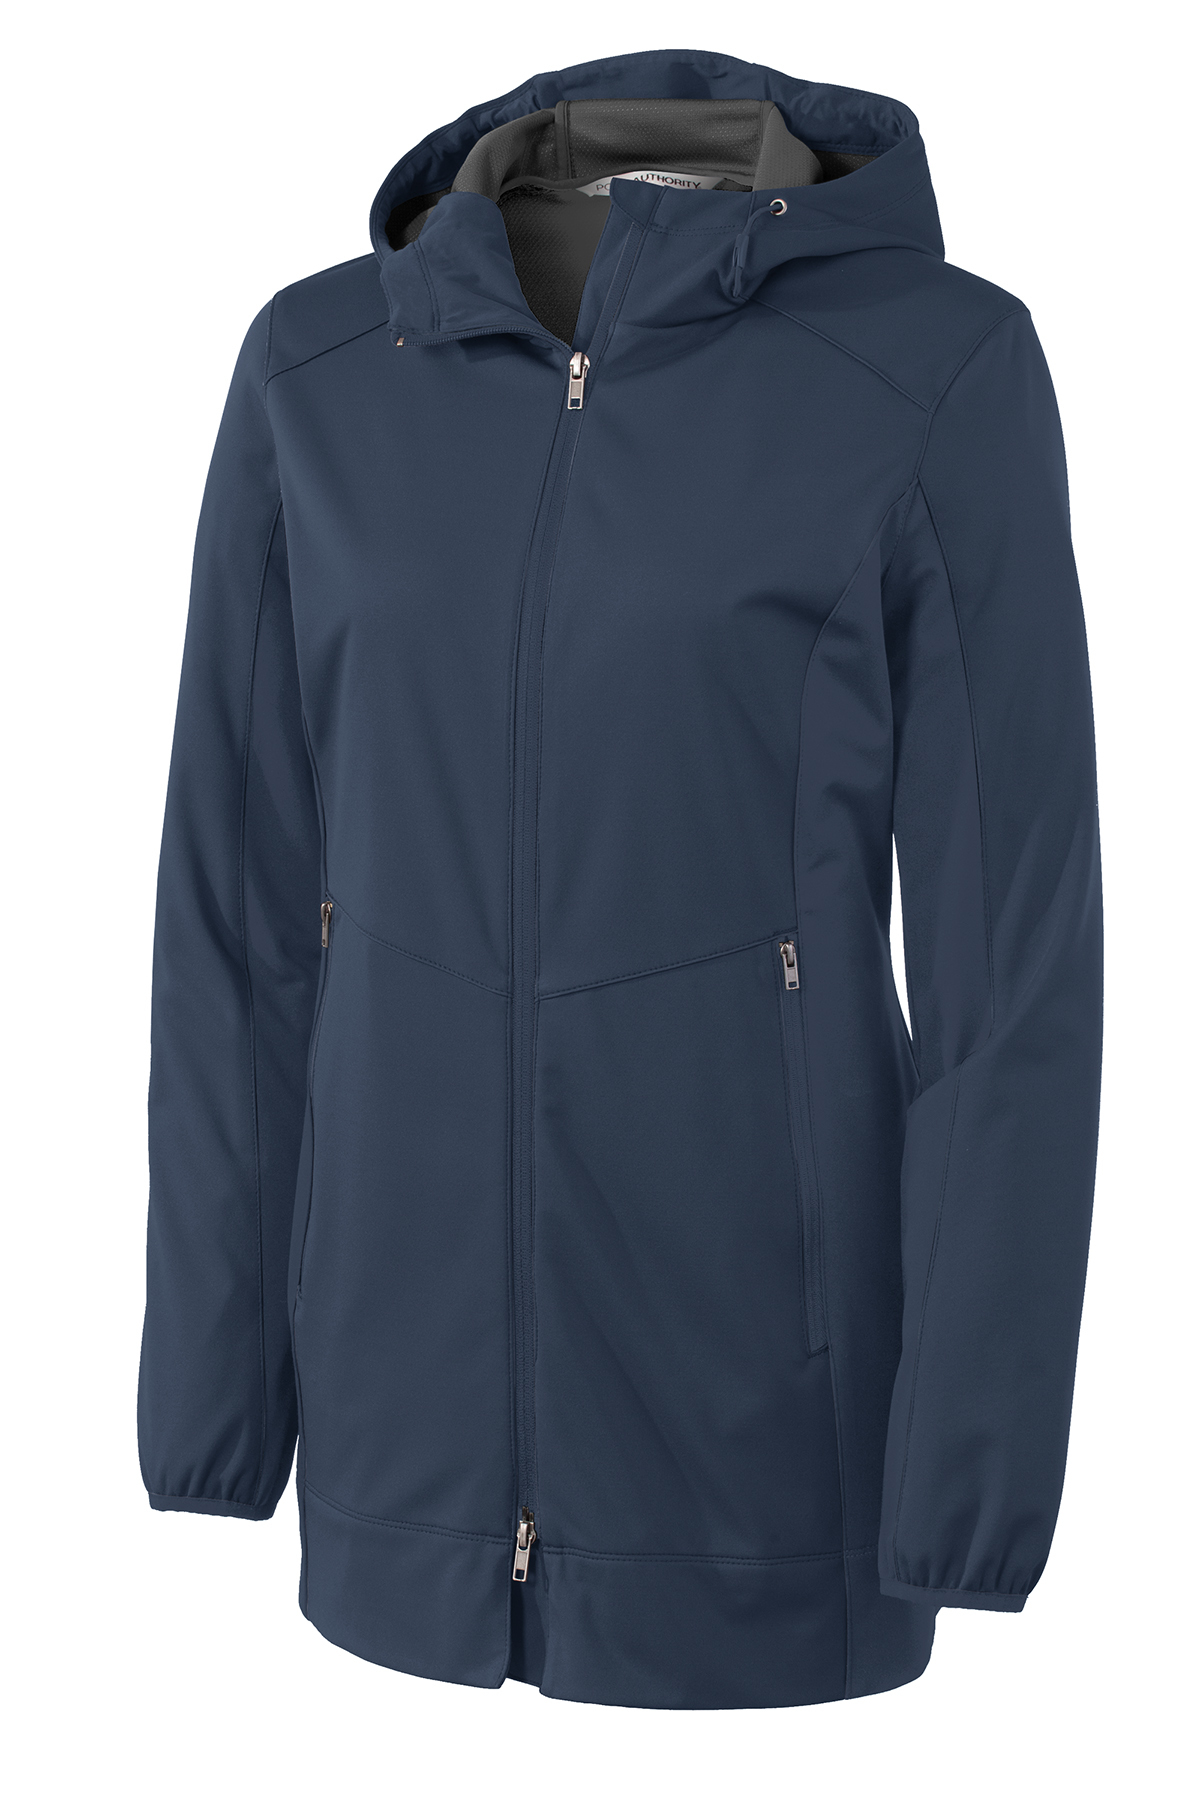 Port Authority Ladies Active Hooded Soft Shell Jacket | Product | Port ...